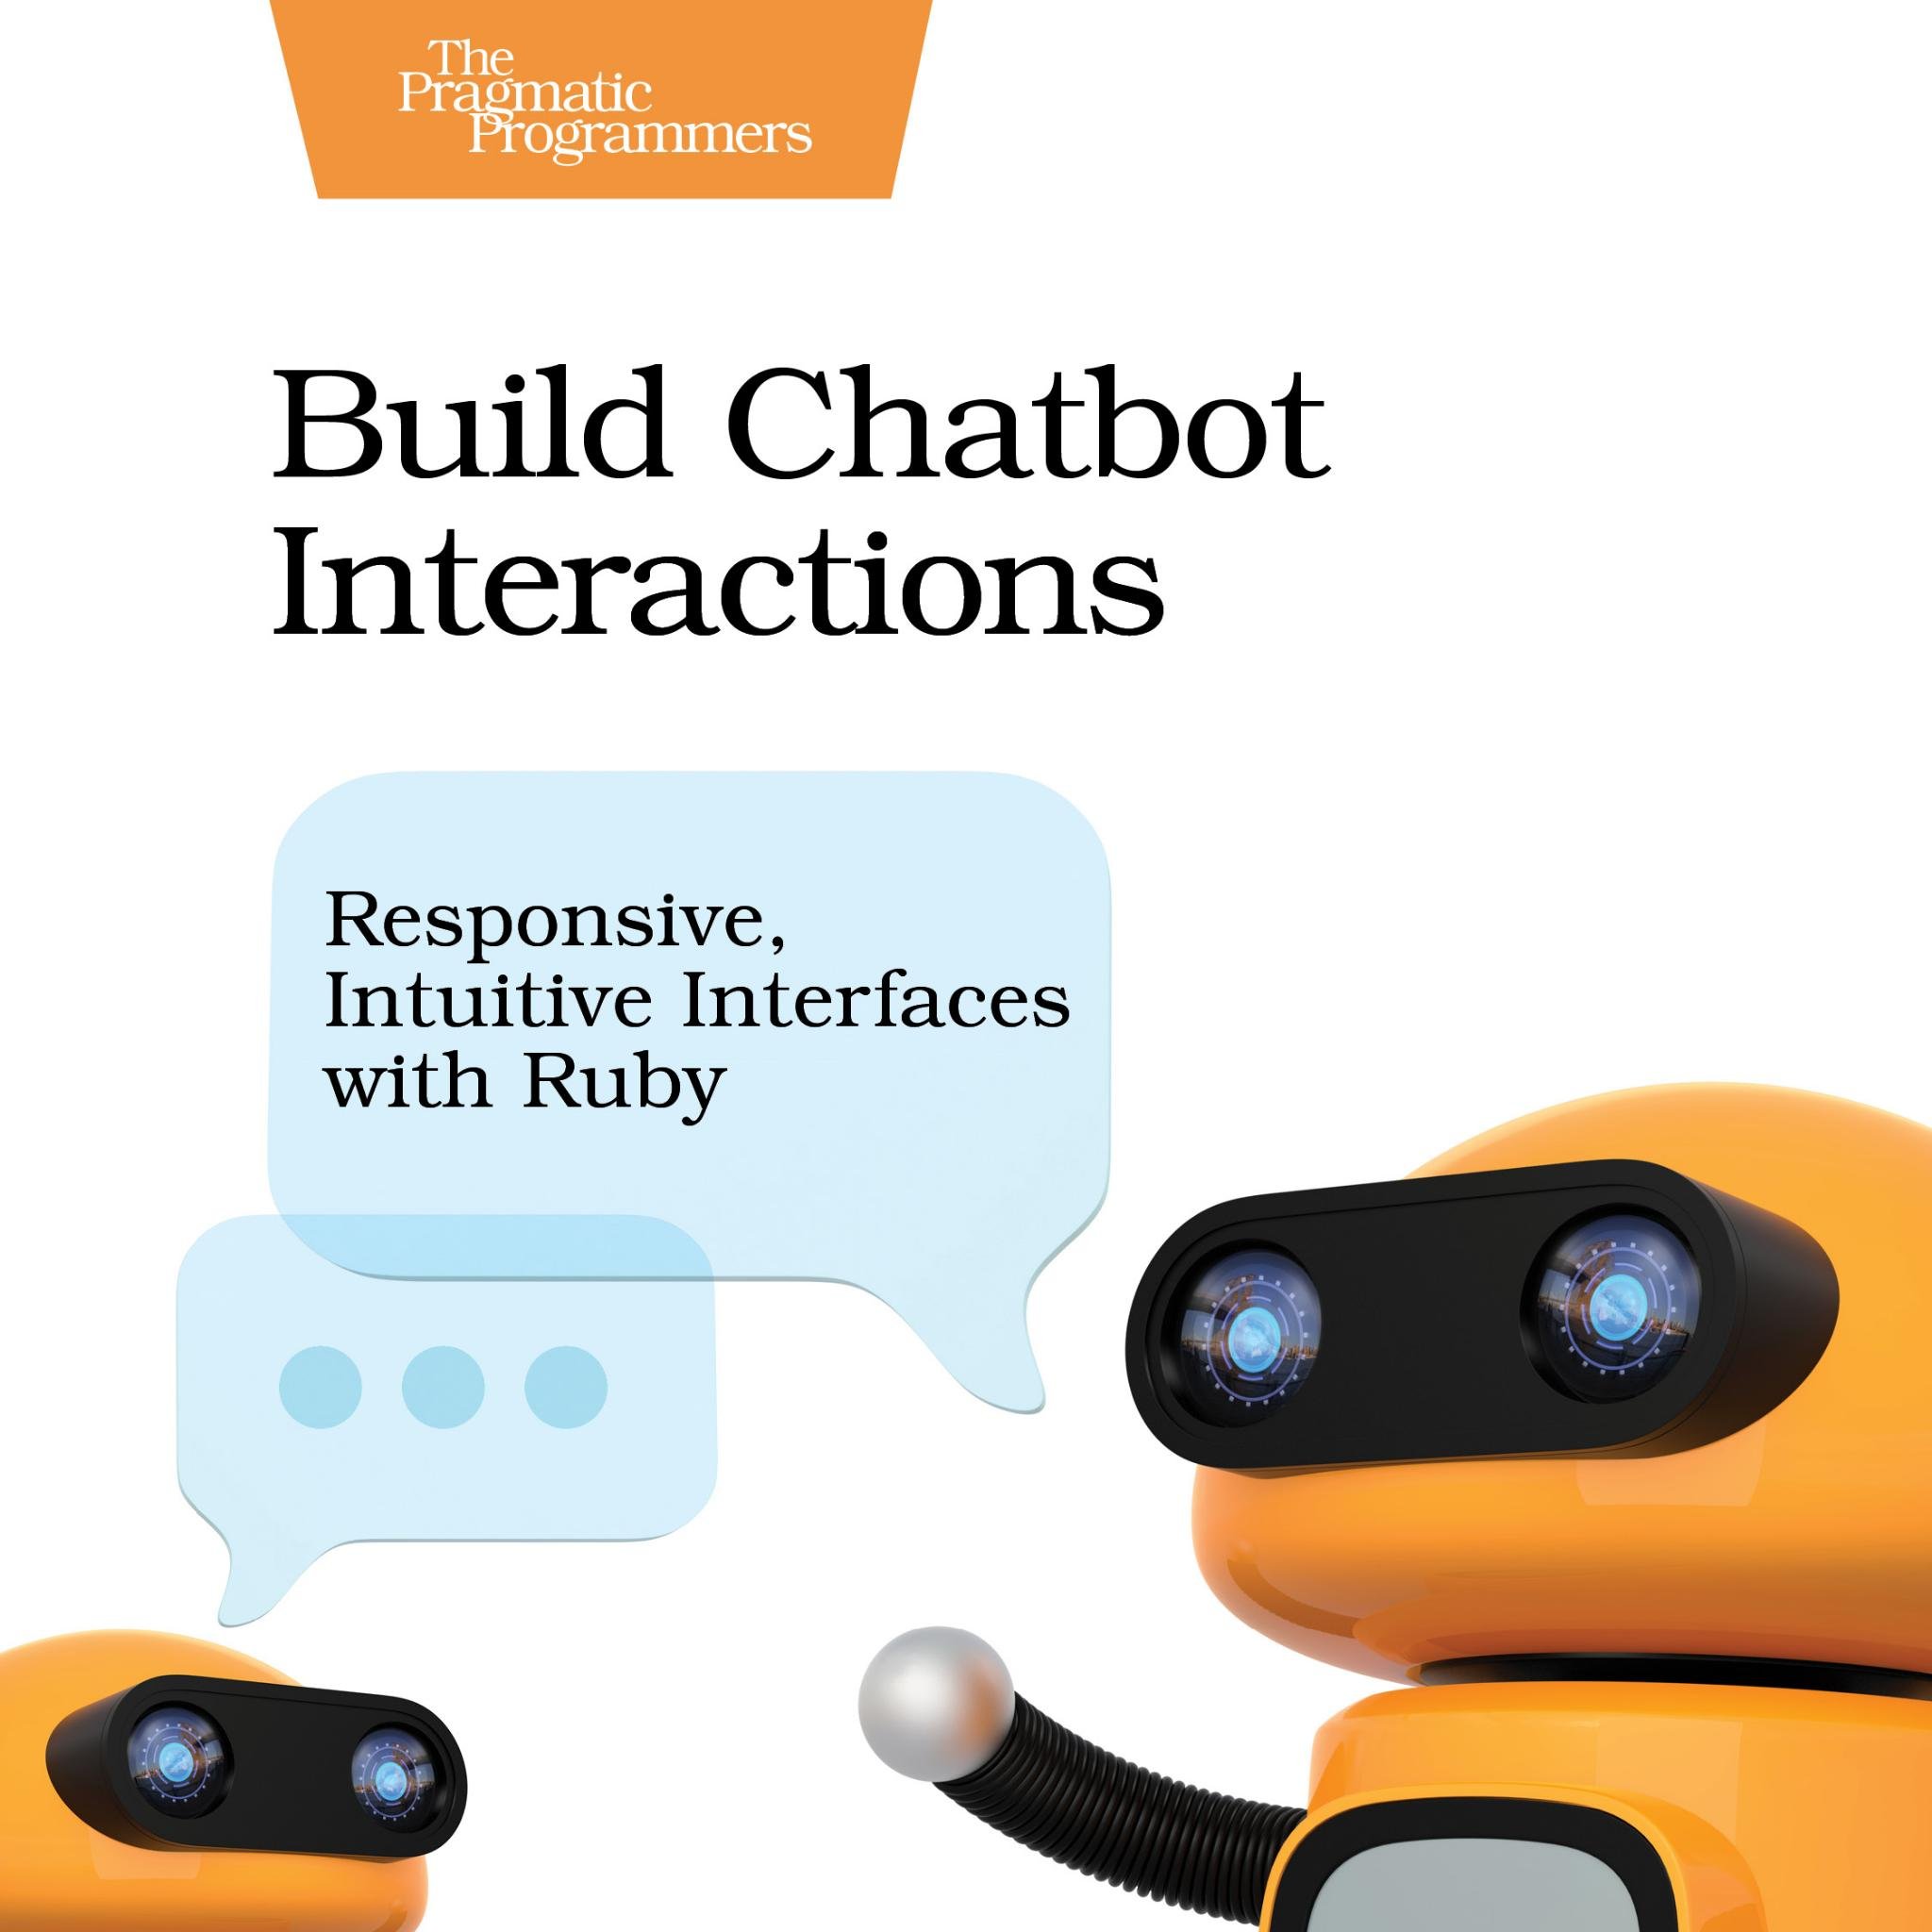 🤖 Info and community for chatbot builders and users. Check out the book below! 👇 Get your print and ebook copies today!

tweets by @dpritchett